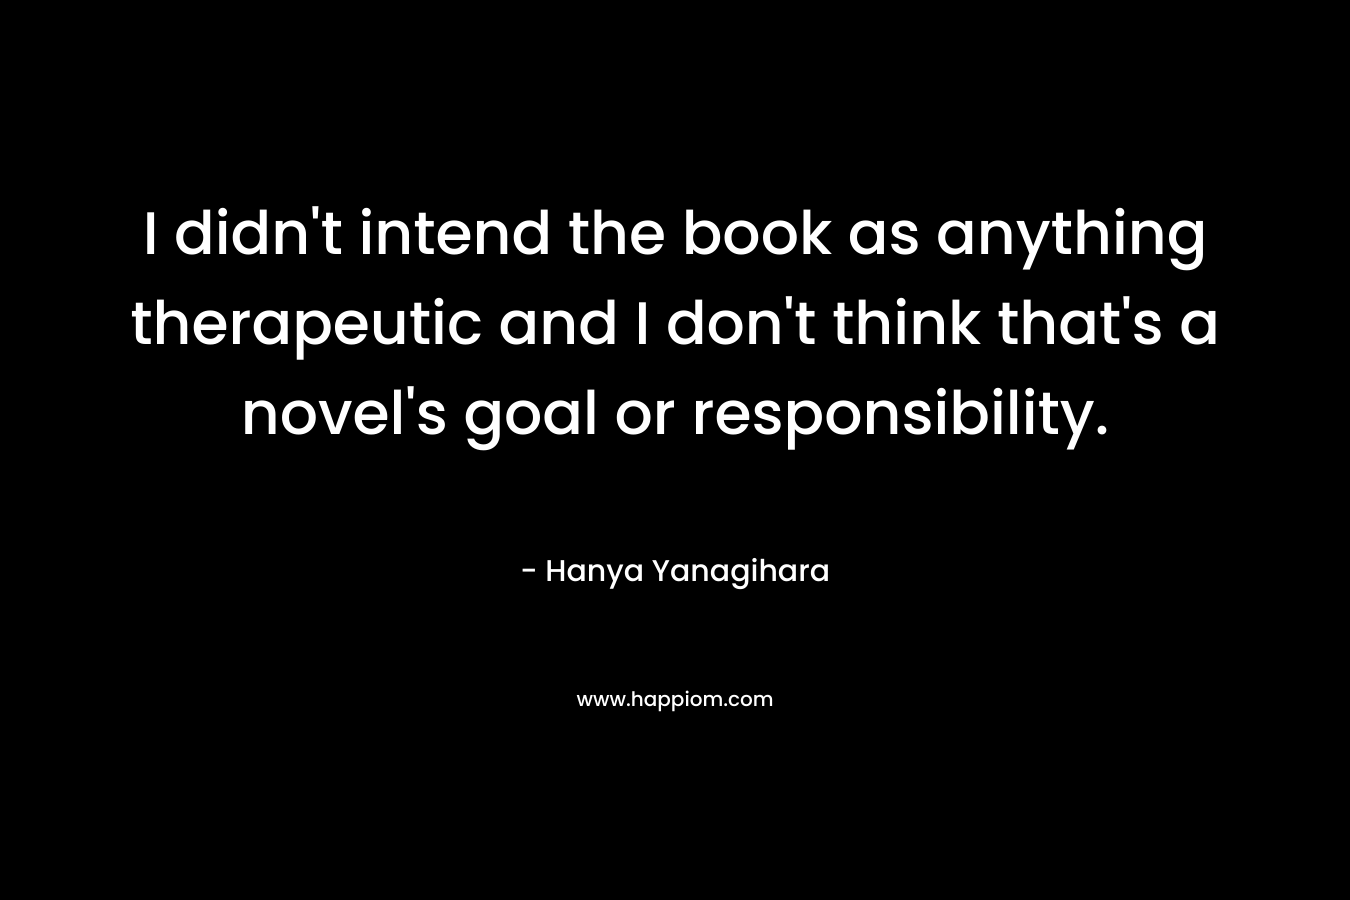 I didn’t intend the book as anything therapeutic and I don’t think that’s a novel’s goal or responsibility. – Hanya Yanagihara